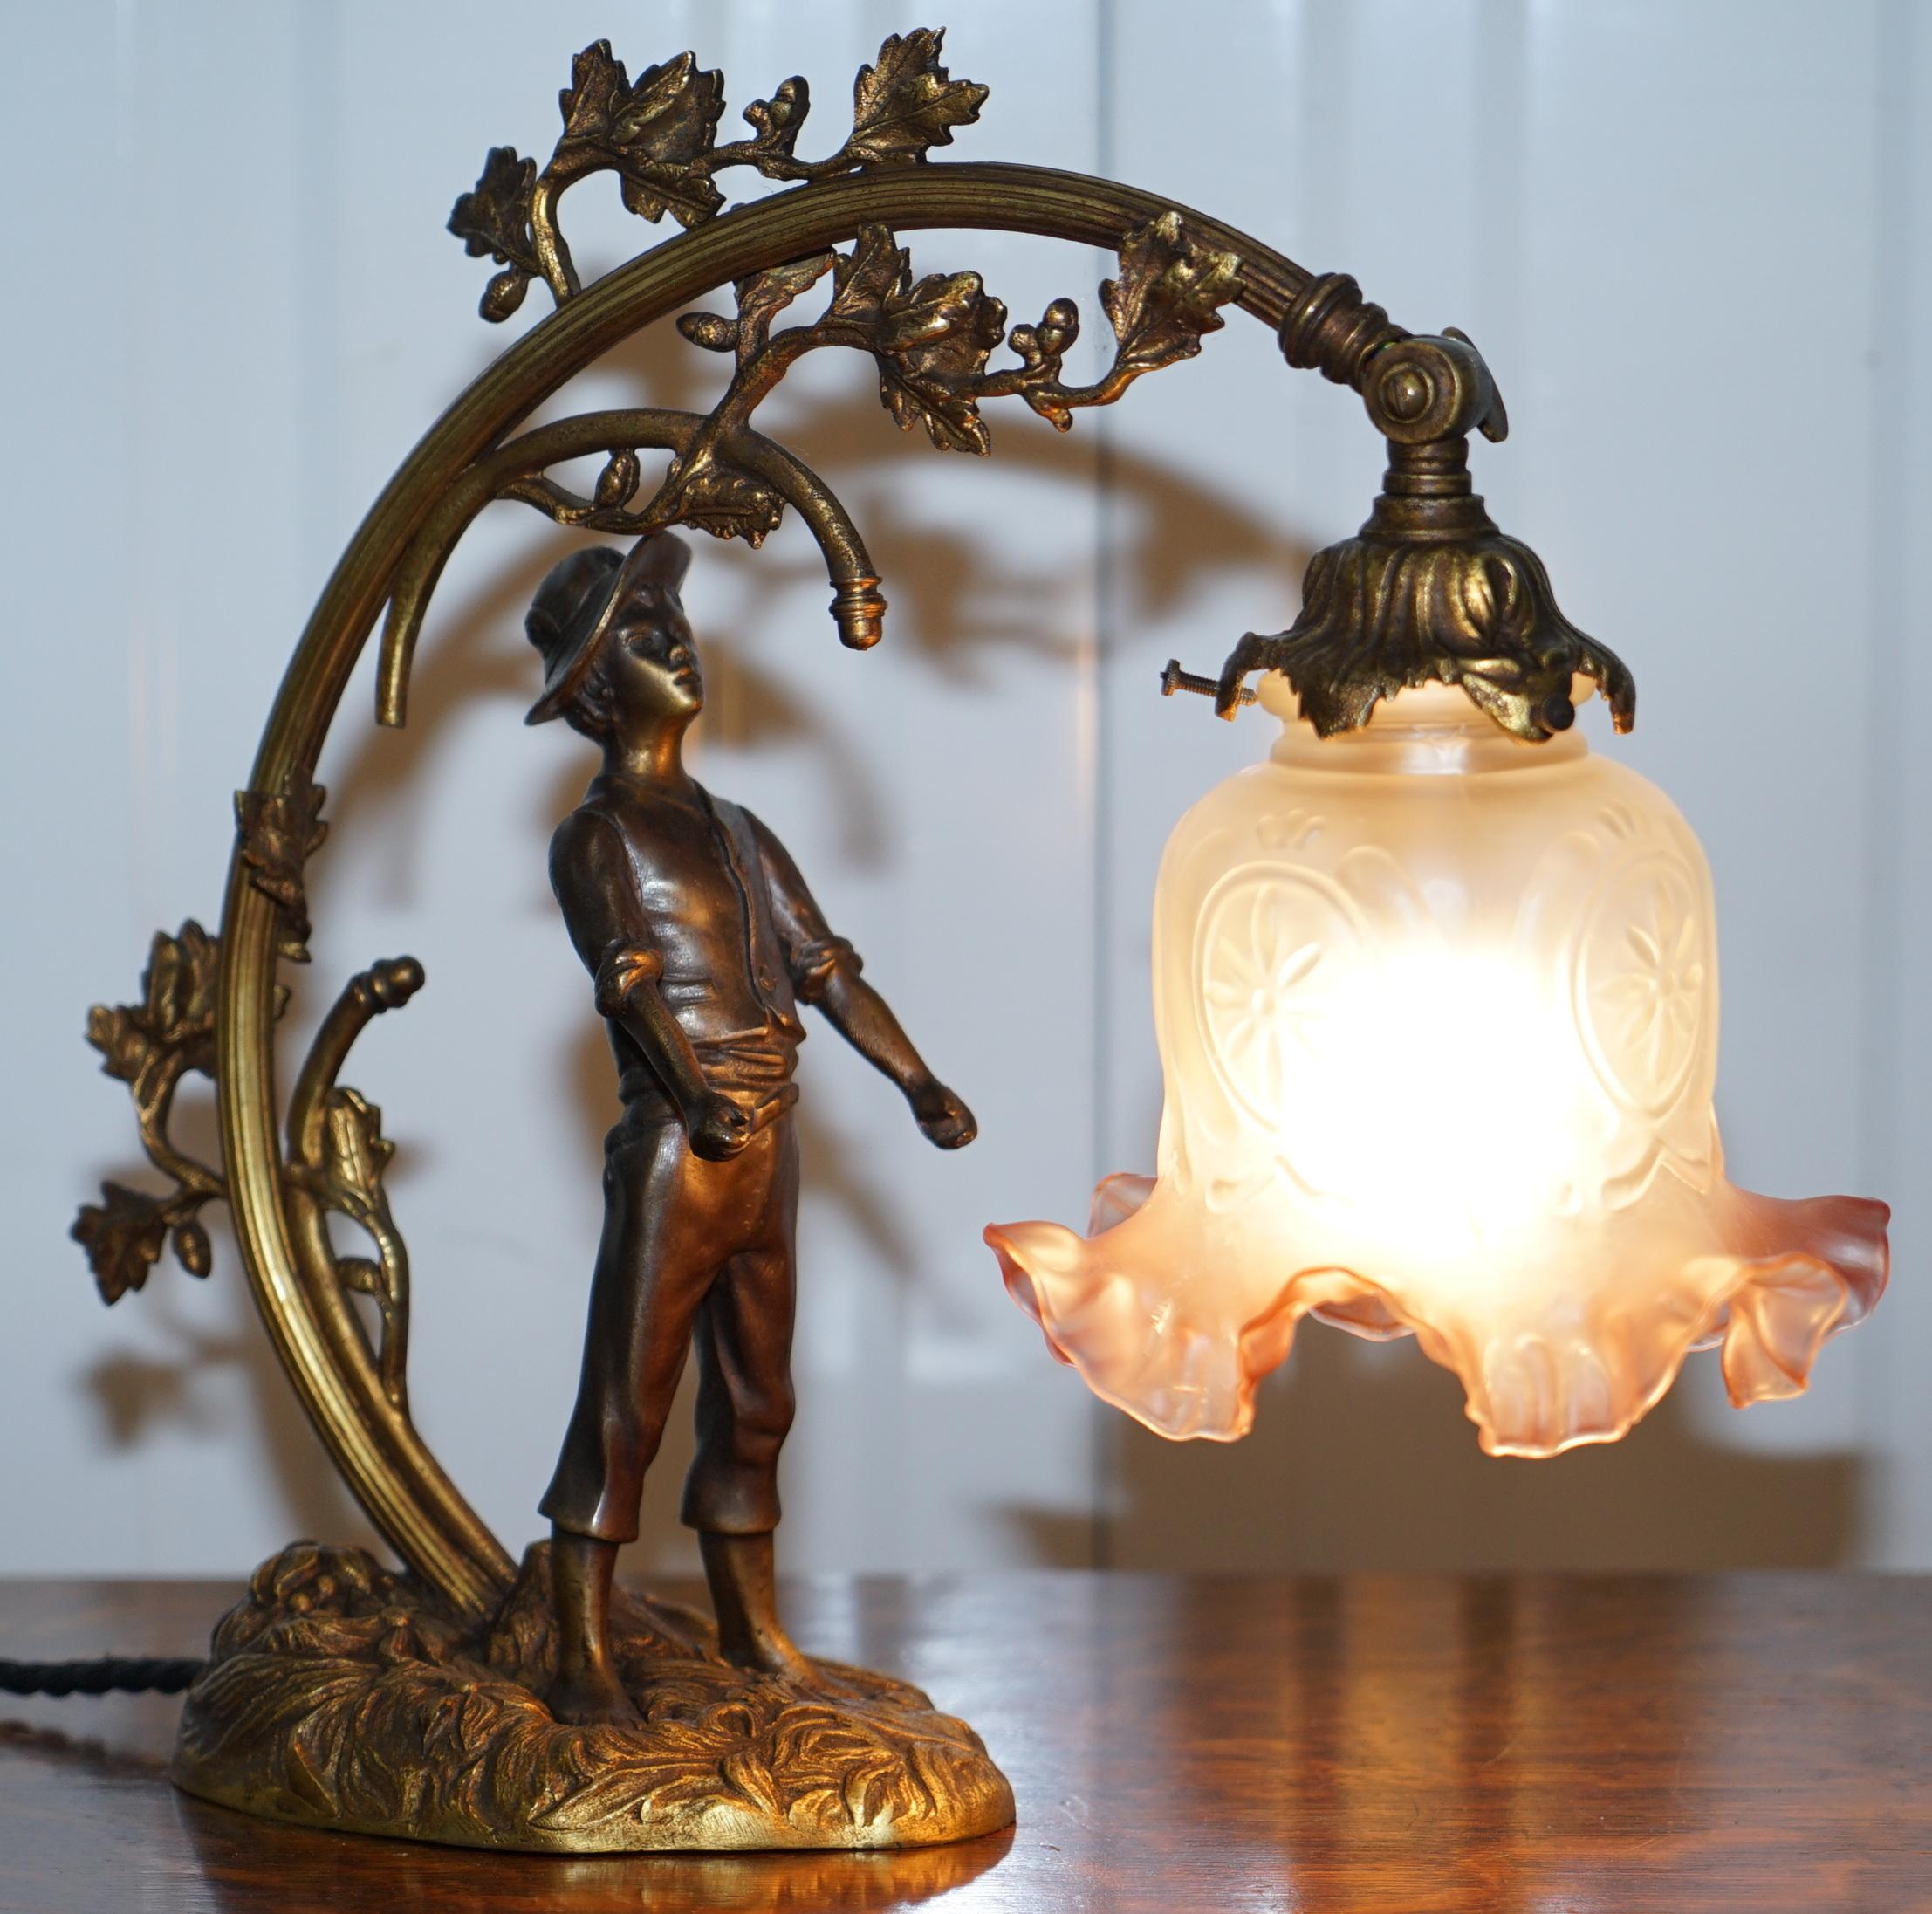 We are delighted to offer for sale this lovely original circa 1920’s continental solid bronze lamp with statue and original shade

This lamp was bought in Bruges by a specialist in restoring antique lamps, its 1920s, rare to find in all bronze and